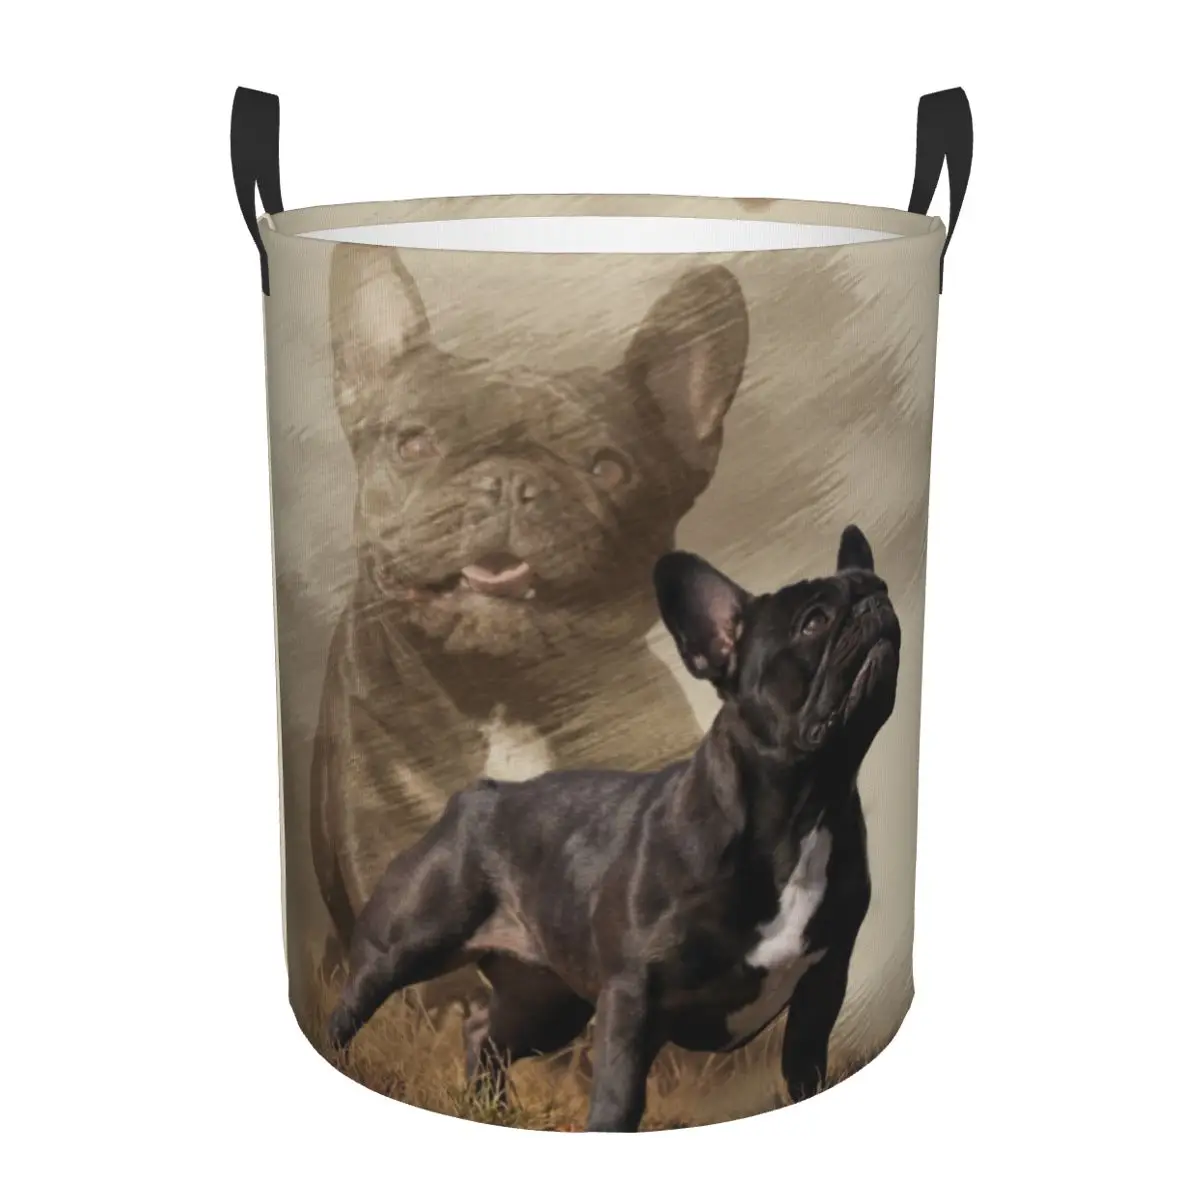 

Cool French Bulldog Laundry Basket Collapsible Pet Dog Toy Clothes Hamper Storage Bin for Kids Nursery